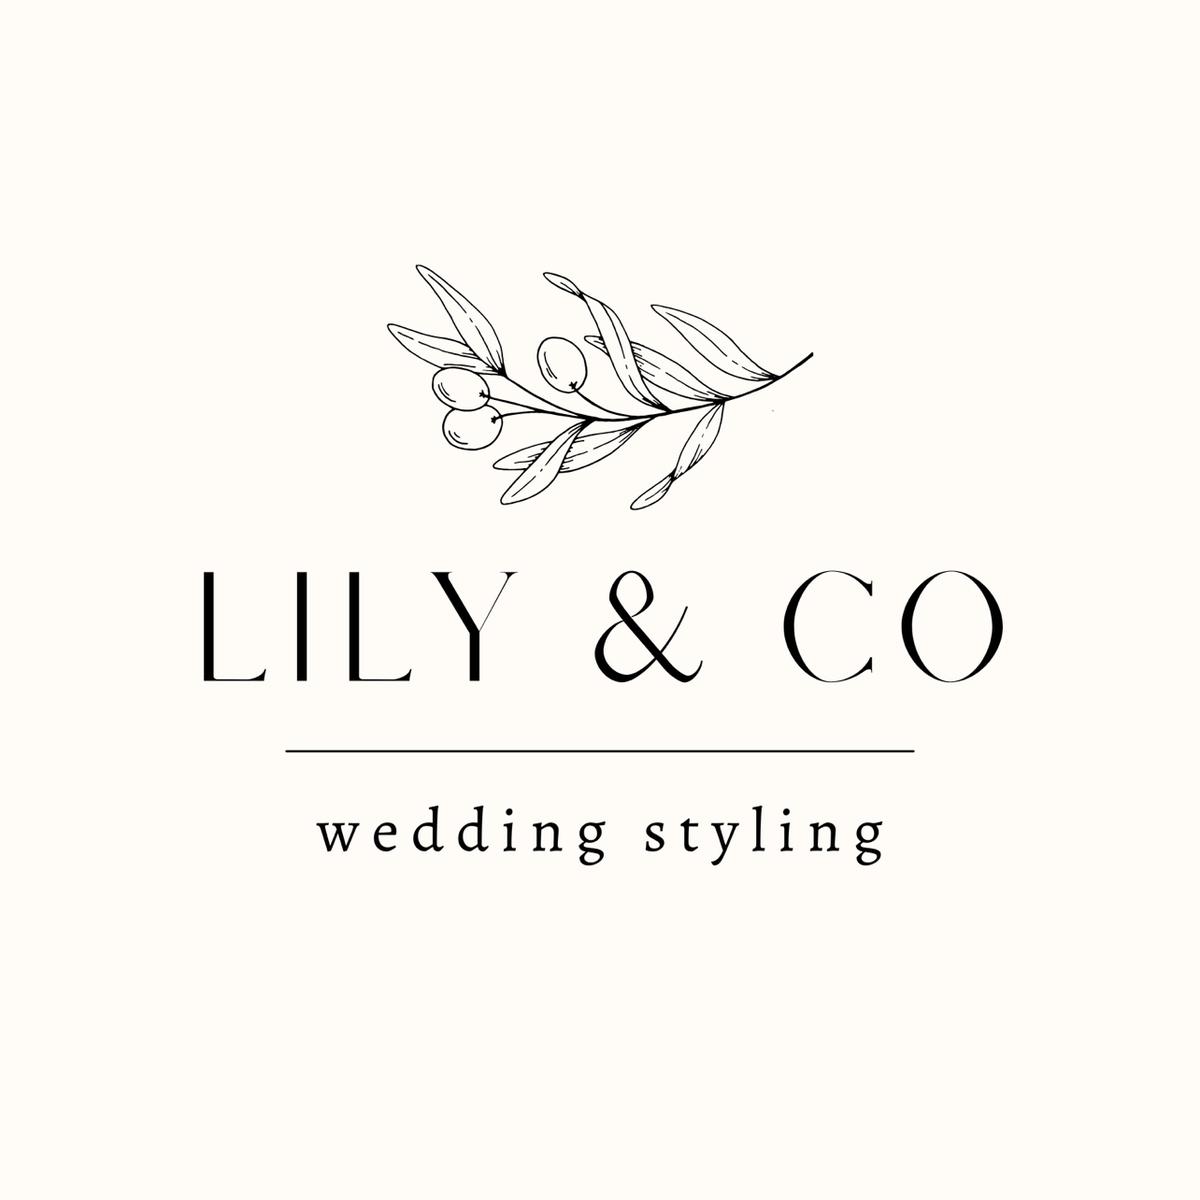 Lily & Co